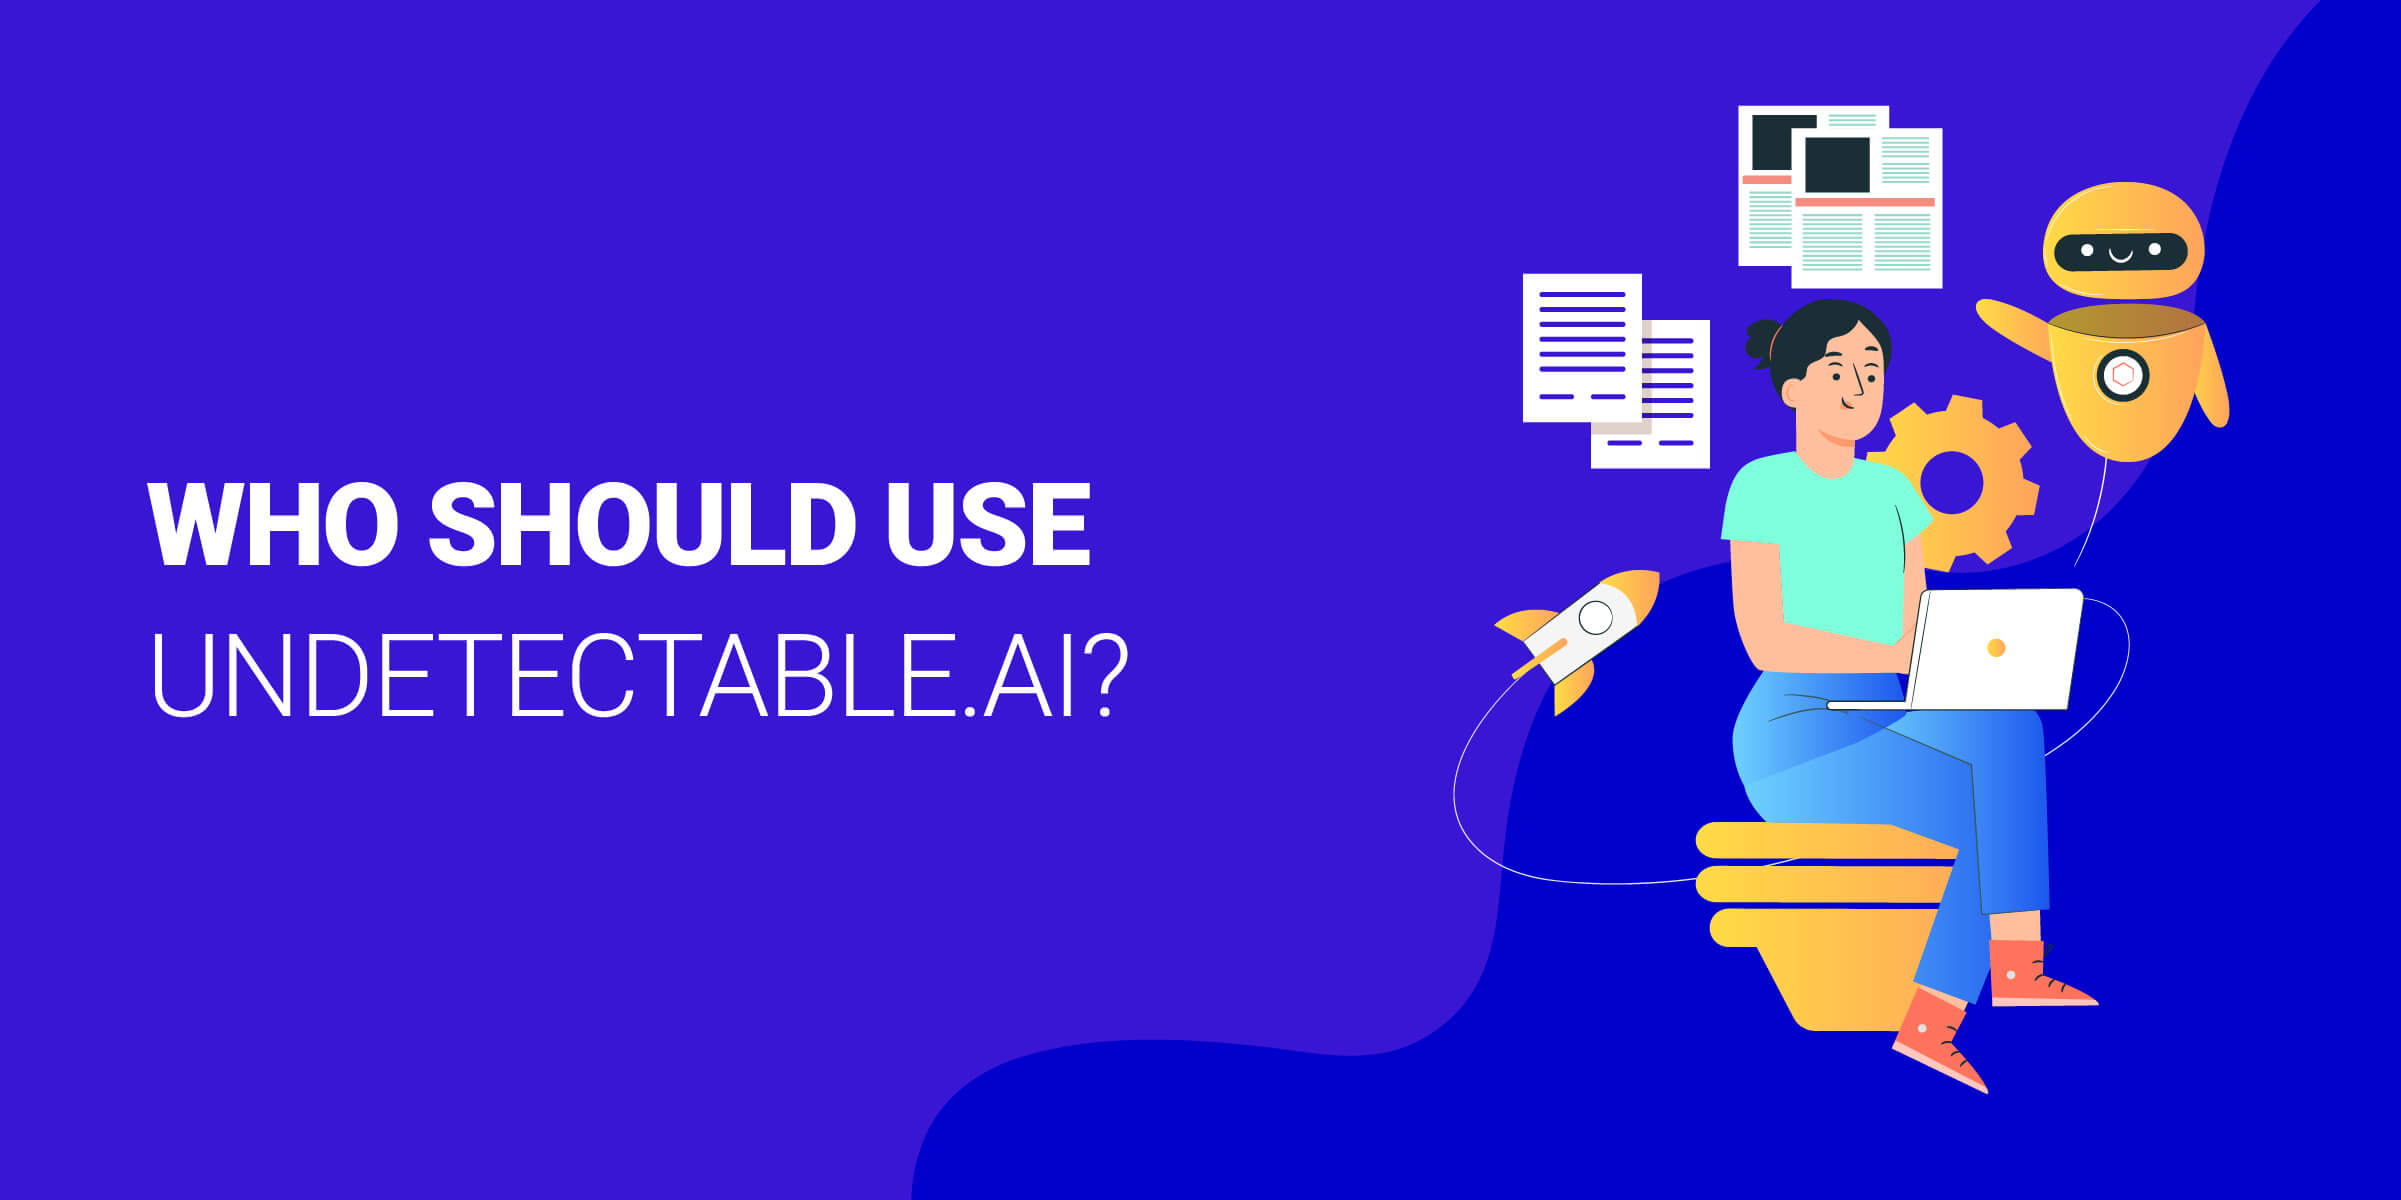 Who Should Use Undetectable AI